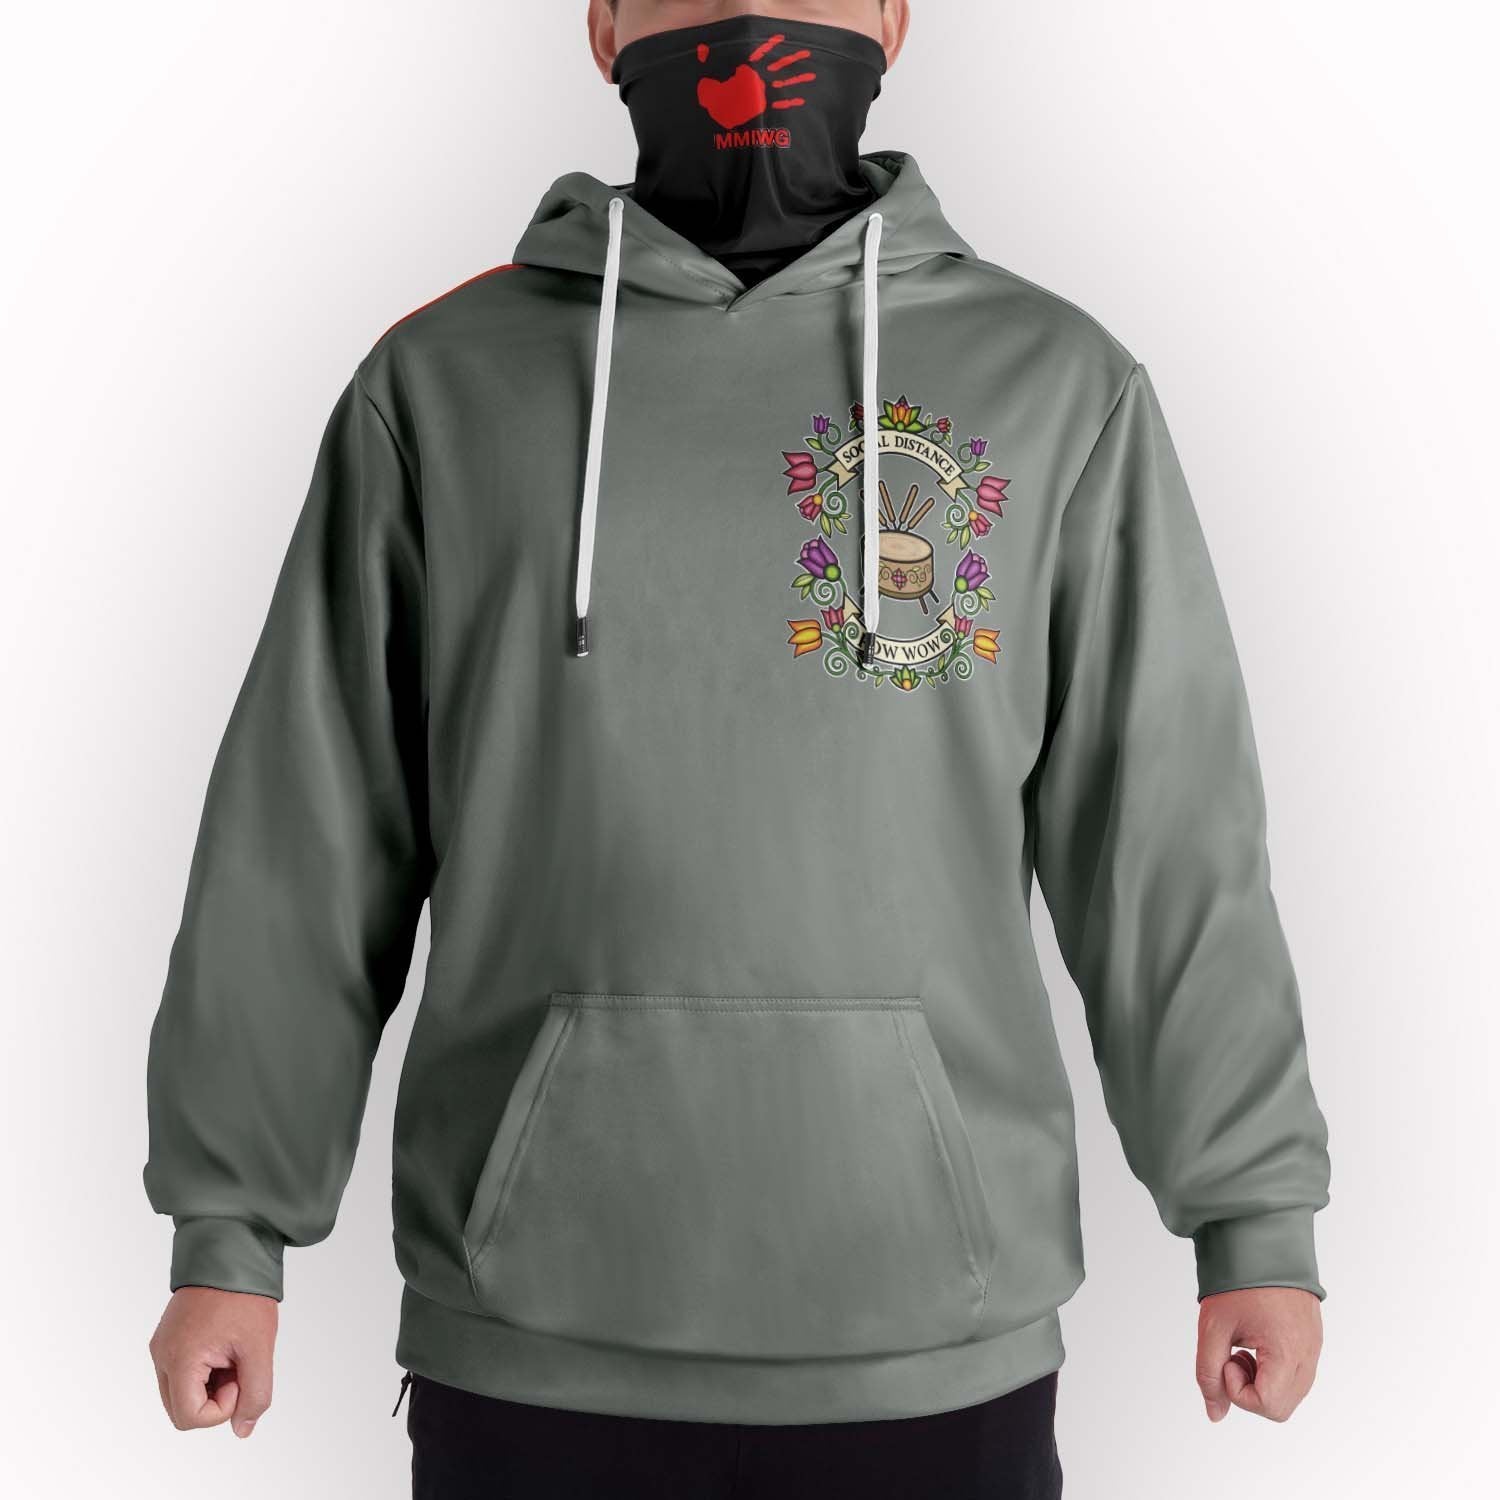 SDP MMIWG Solid Grey Hoodie with Face Cover